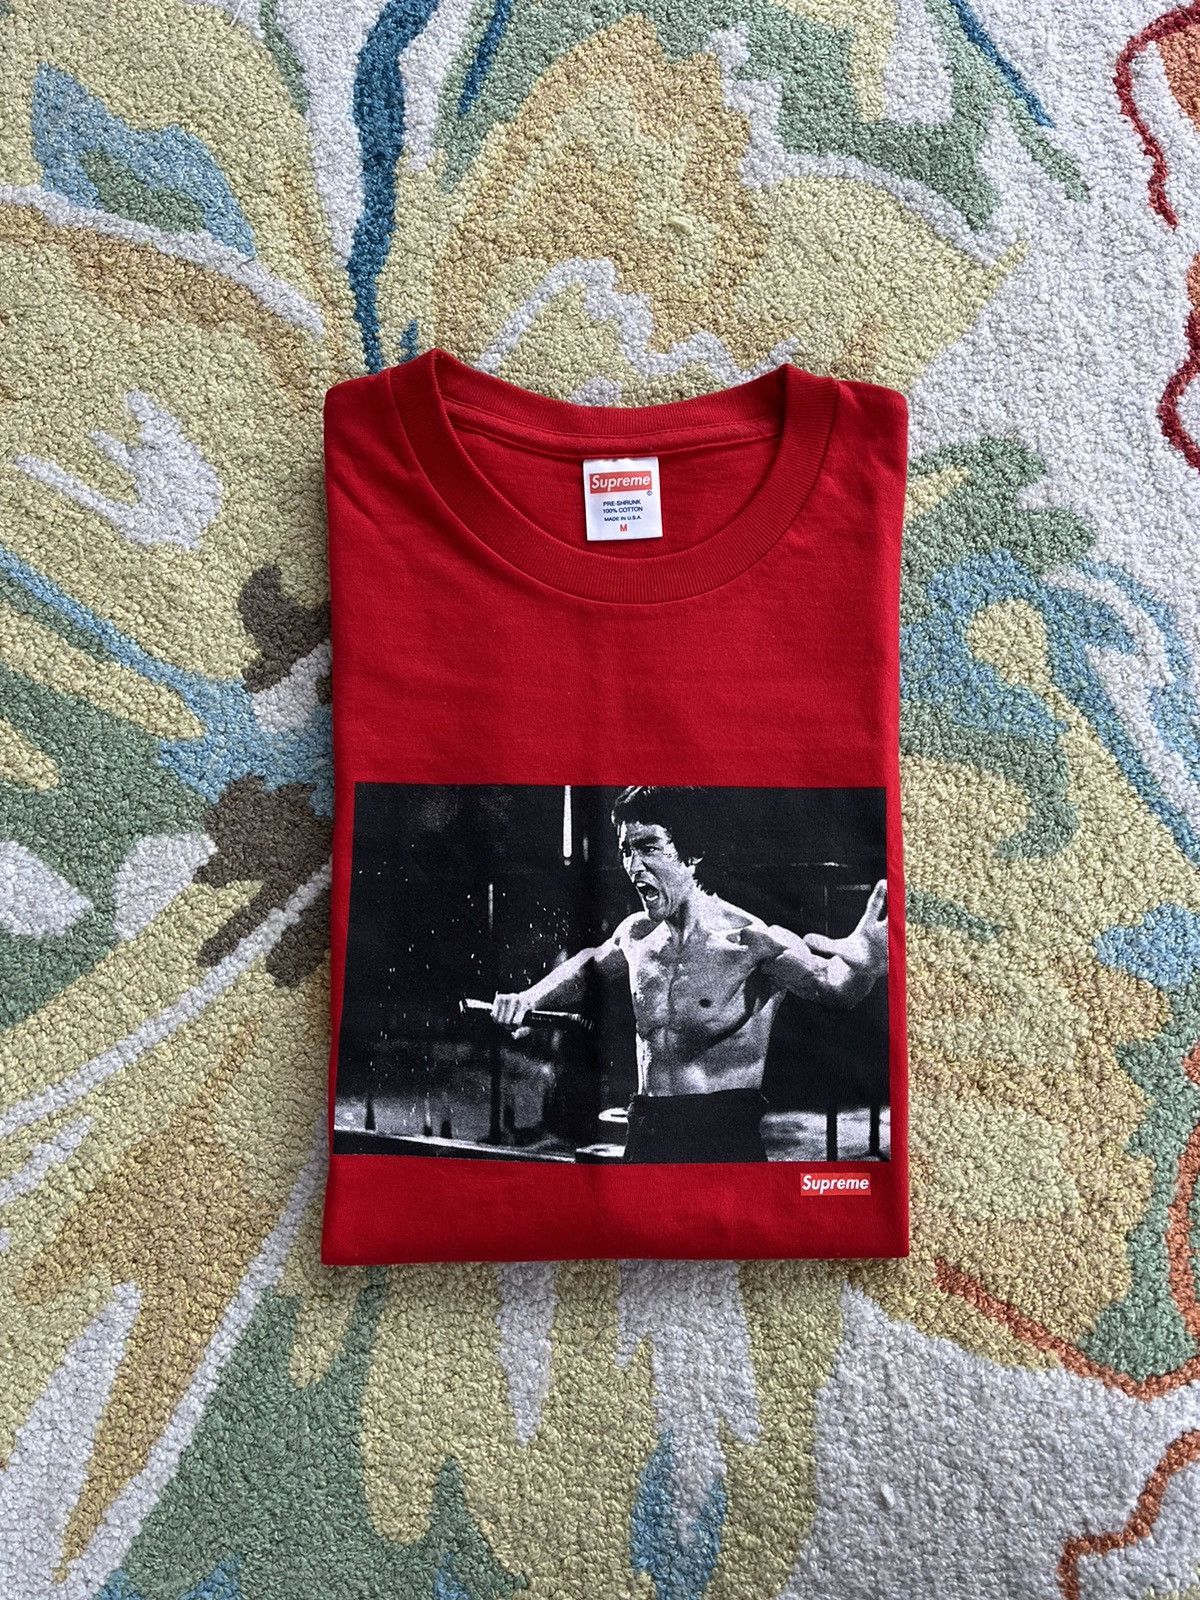 Supreme Supreme Bruce Lee Enter The Dragon Tee FW13 Red | Grailed